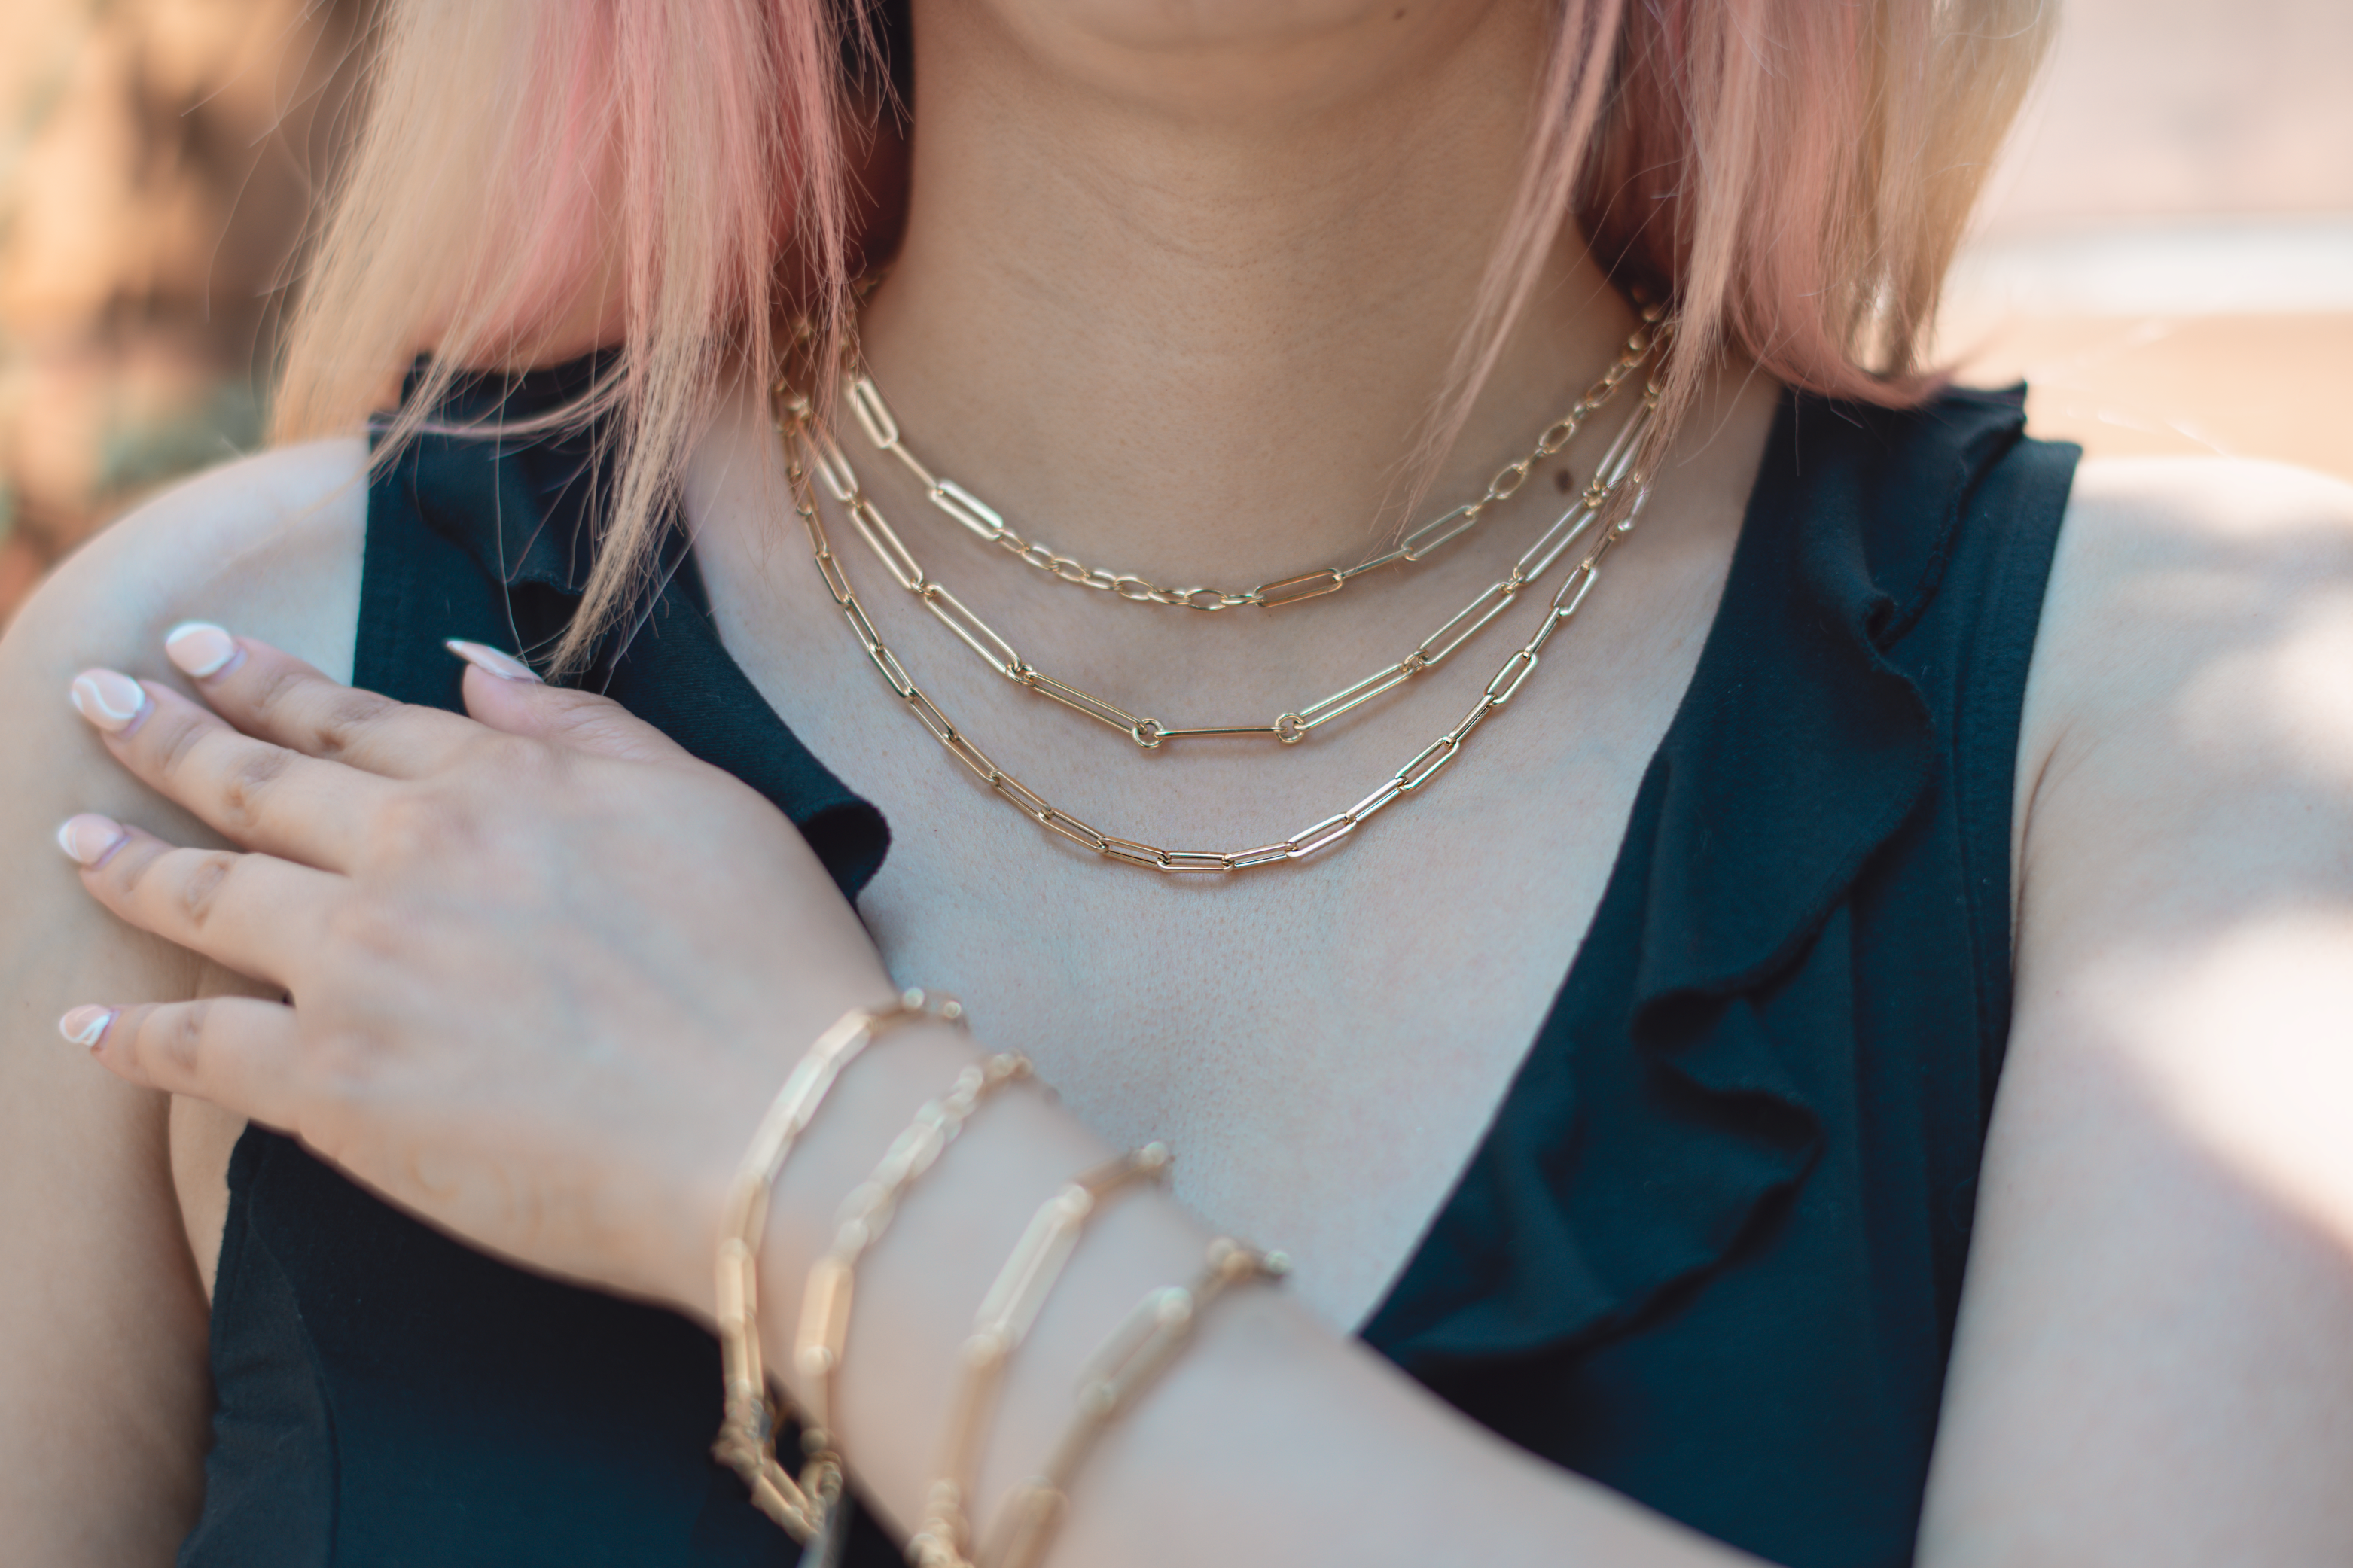 Solid Gold Paperclip Chain Necklace - Chic Enduring Gift